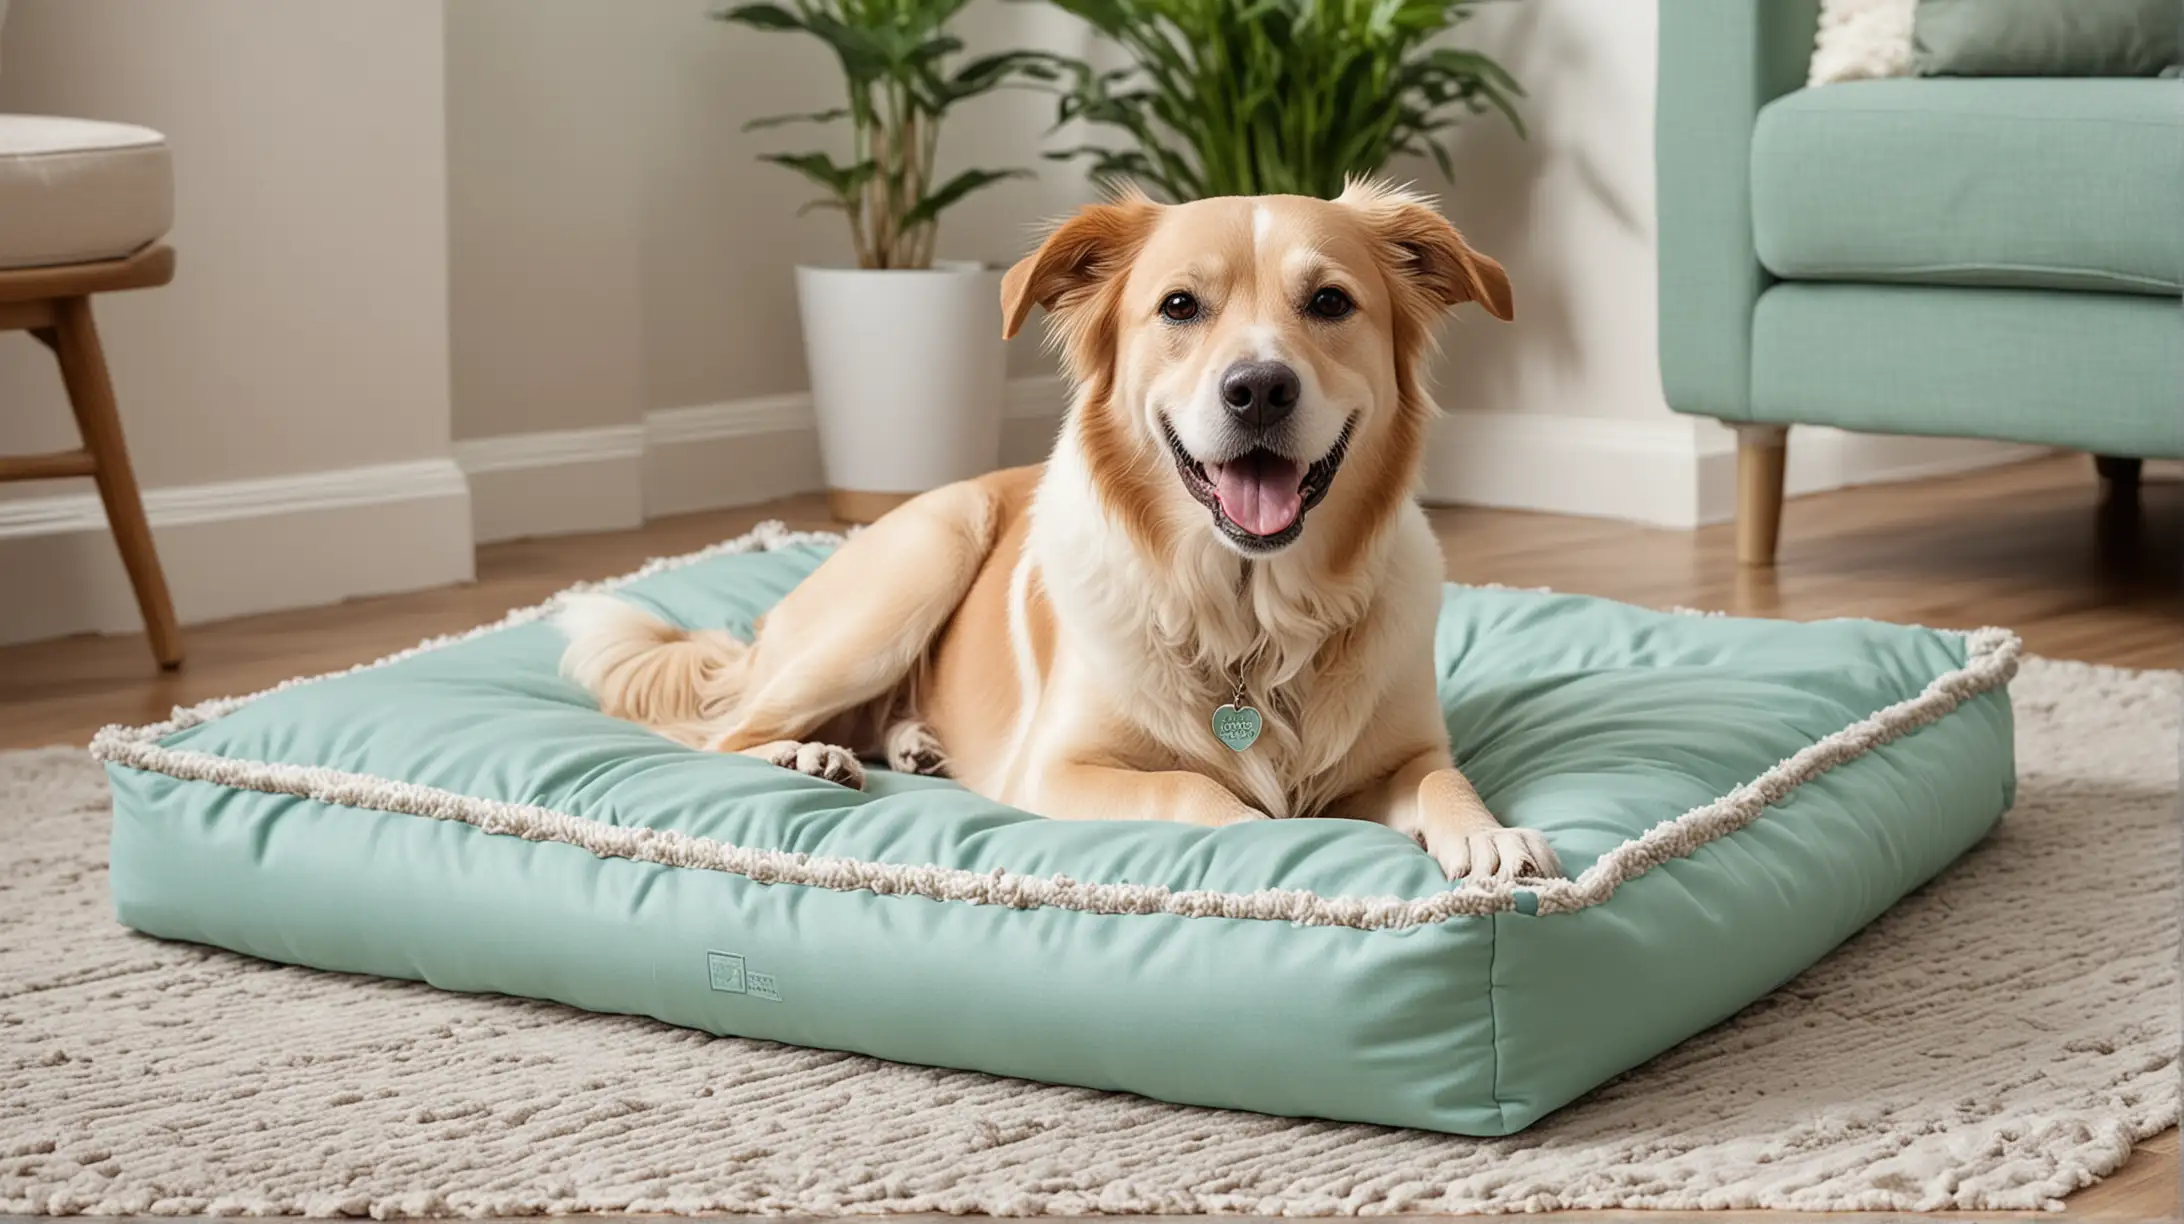 A happy dog lying calmly on a durable, chew-resistant dog bed in a high-end home setting. The room is stylishly decorated with mint, sky blue, beige, white, and grass green colors, with a splash of bright color accents. The dog looks relaxed and content, showing no signs of anxiety or destructive behavior. The setting is warm and inviting, reflecting a harmonious environment for both the pet and the owner.